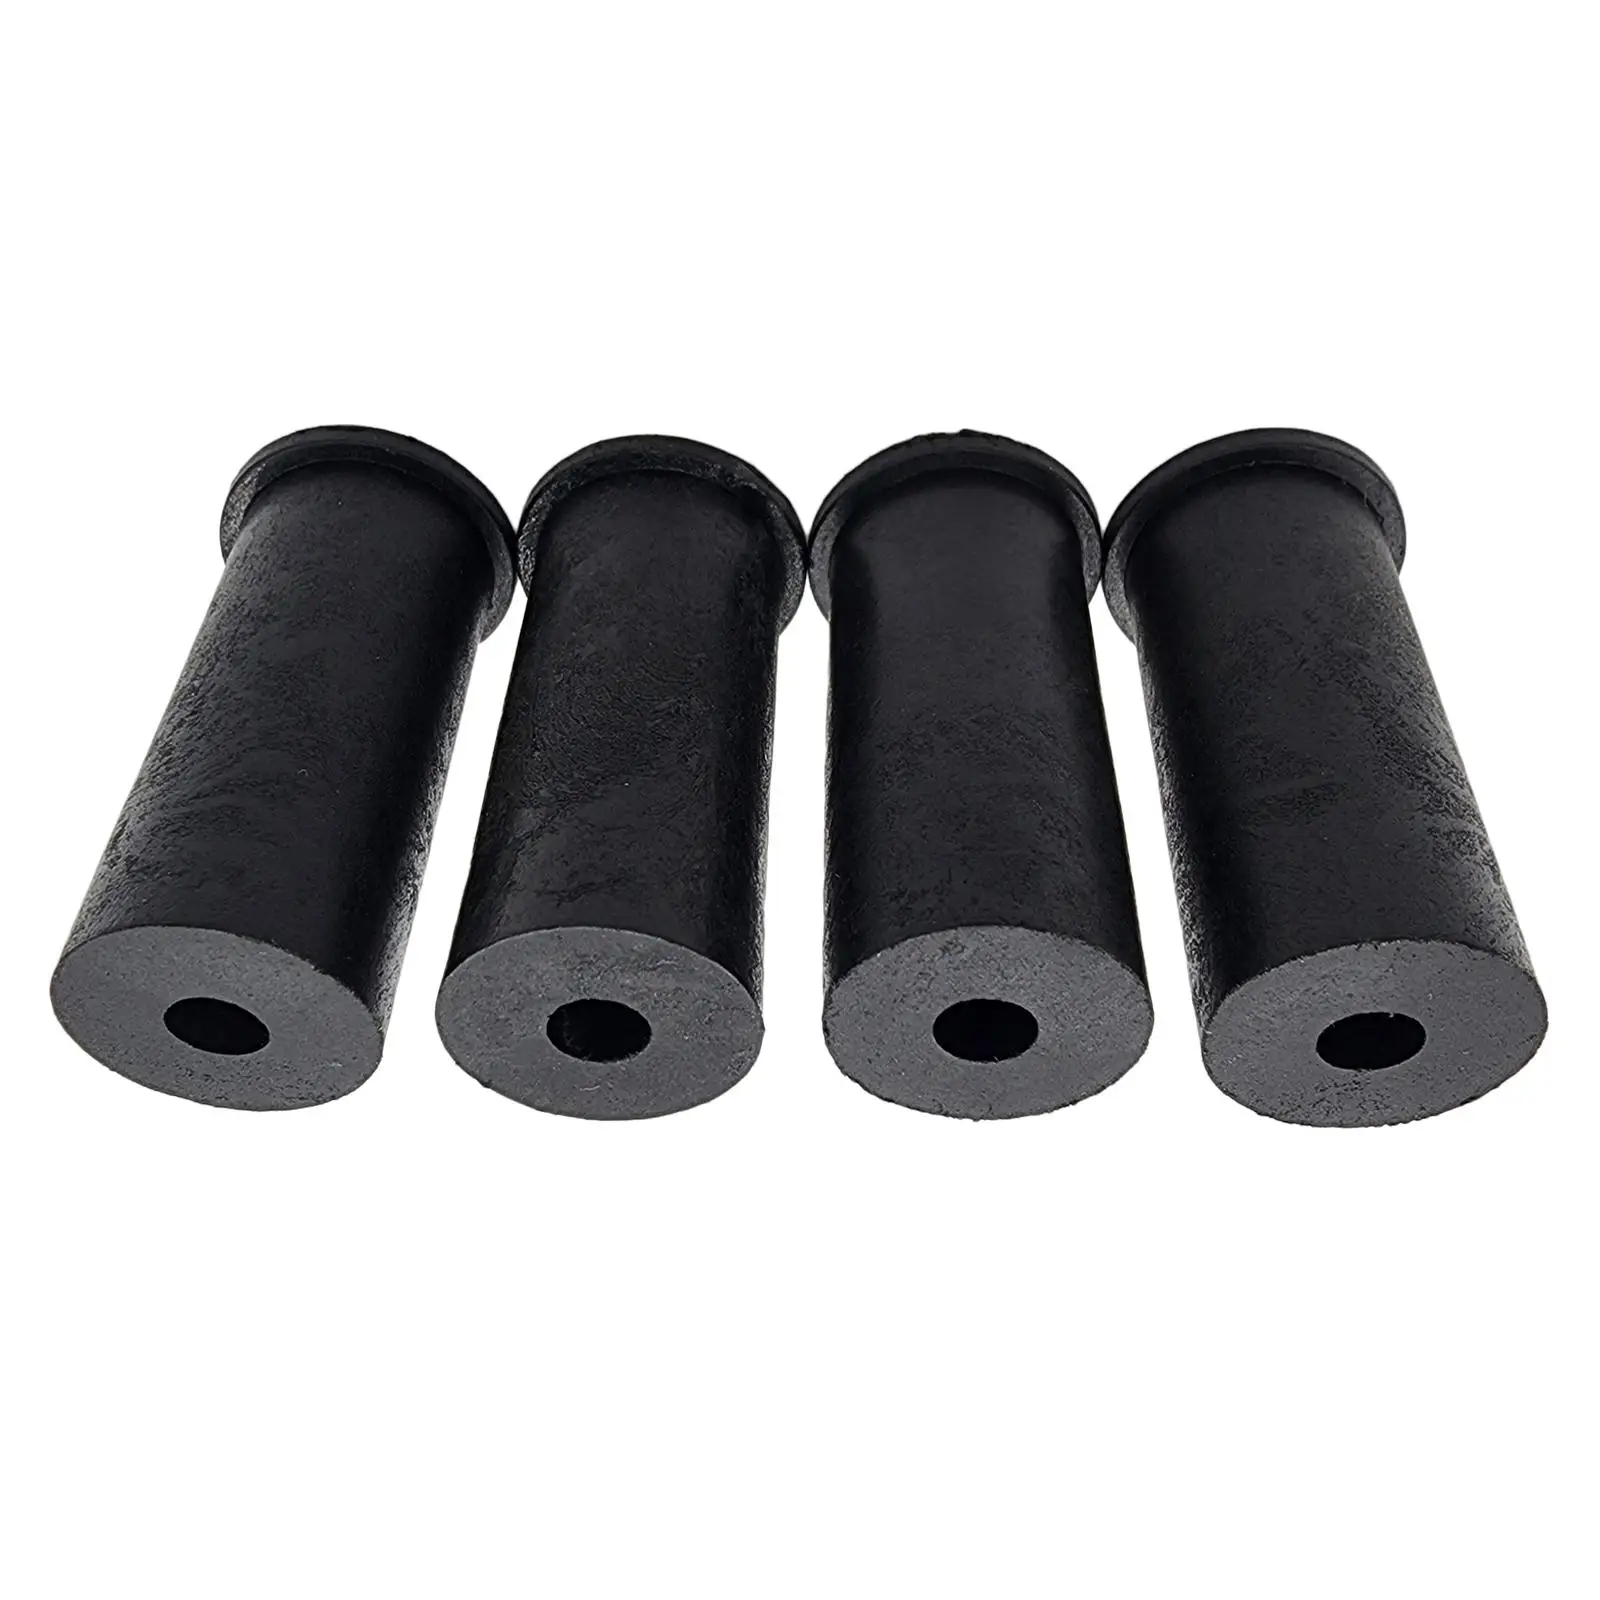 4x Metal Door Hinge Bushings Replaces Spare Parts Accessory Easy Installation Supplies Car Durable for 1000-3 700-3